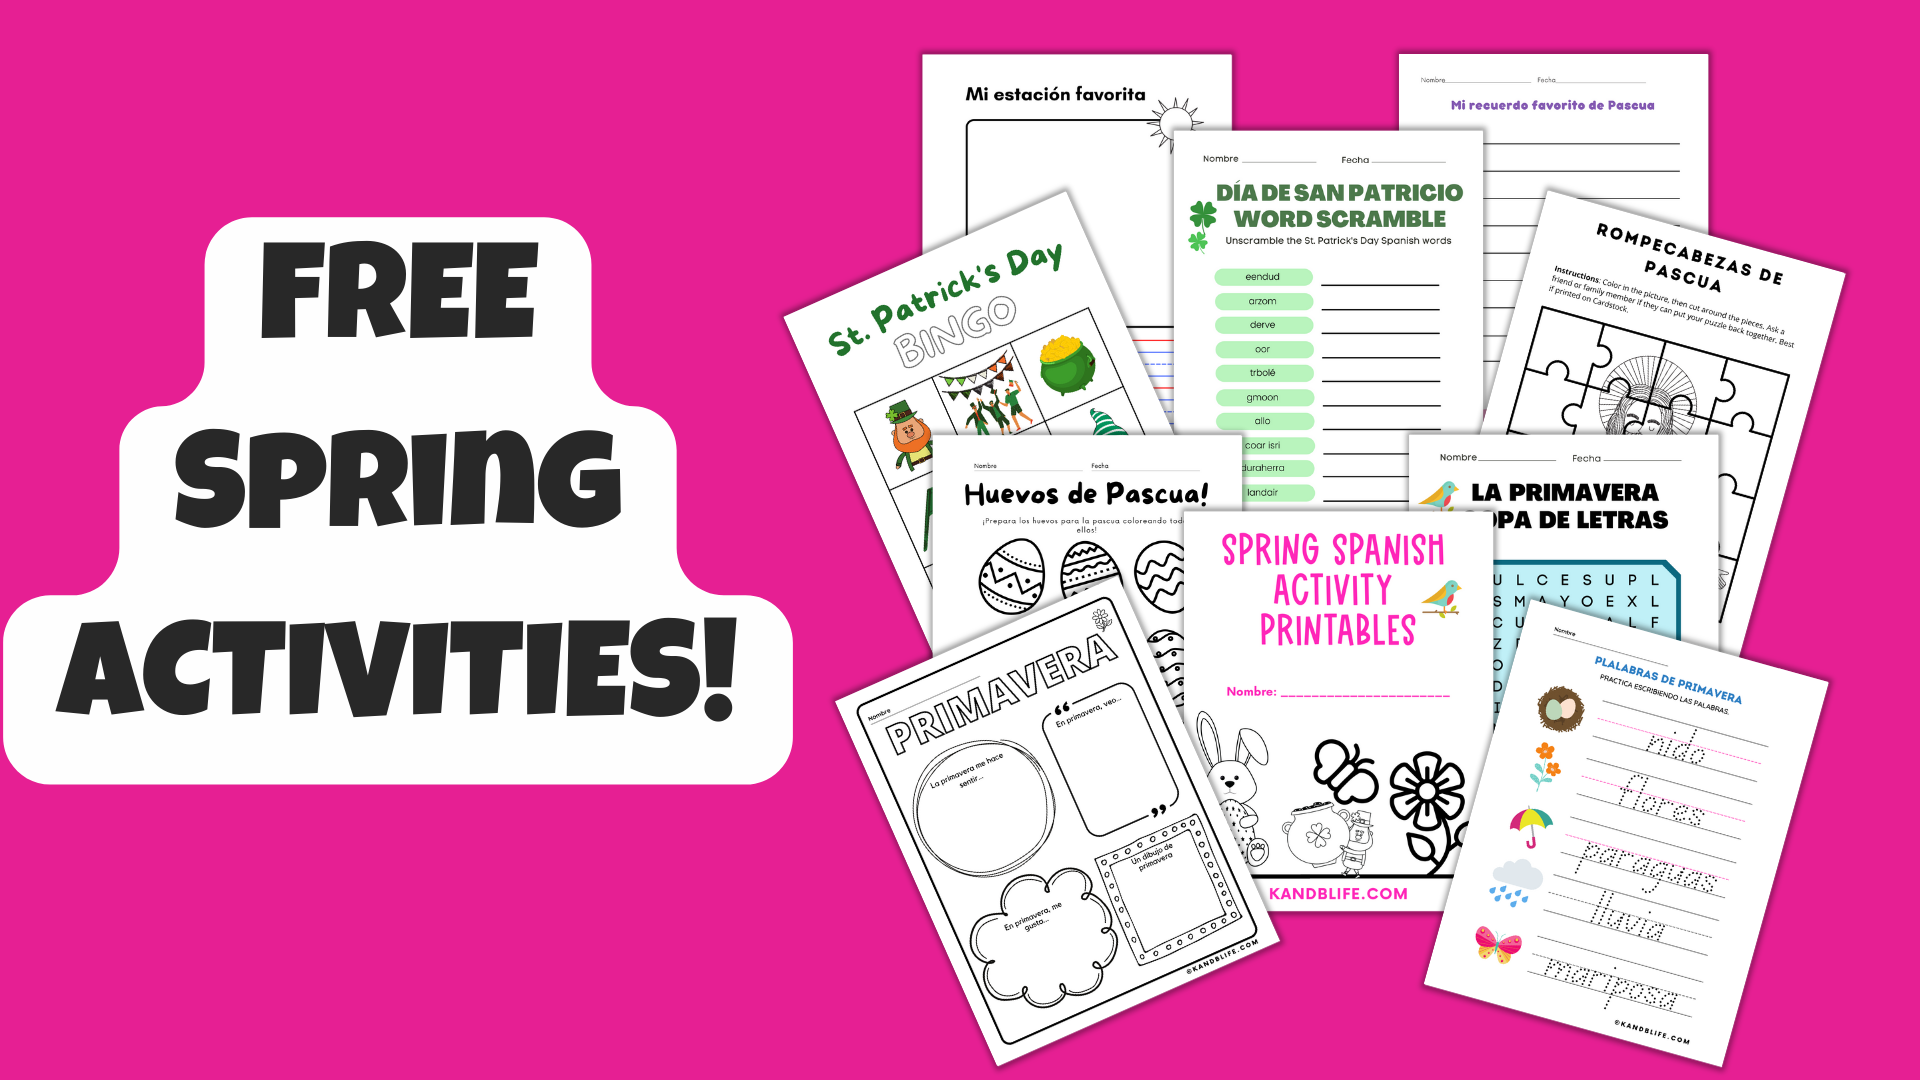 Free Spanish Activities for Spring picture with examples from the book.